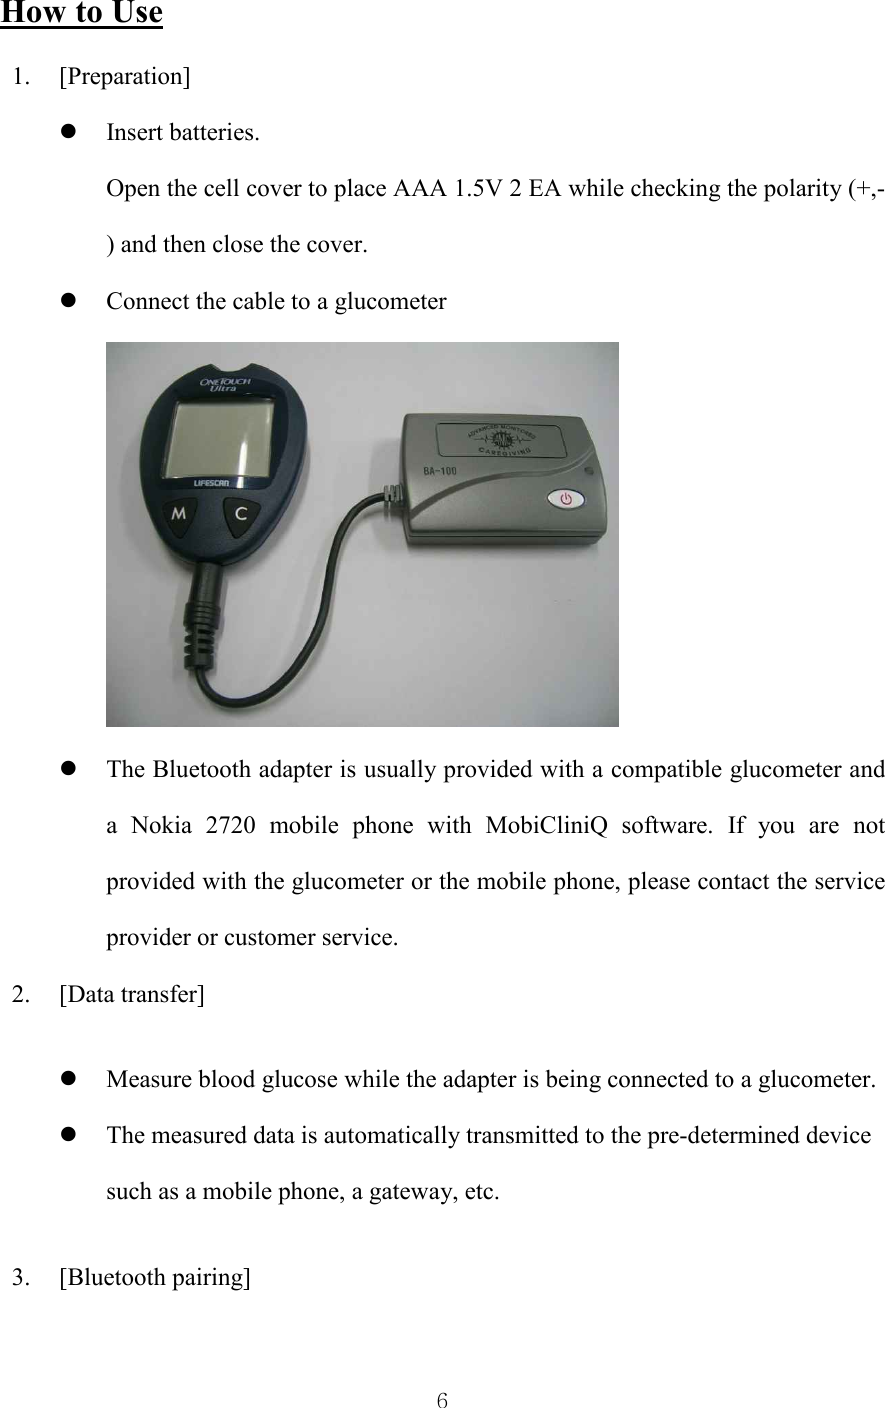  6 How to Use 1. [Preparation] l Insert batteries. Open the cell cover to place AAA 1.5V 2 EA while checking the polarity (+,-) and then close the cover. l Connect the cable to a glucometer  l The Bluetooth adapter is usually provided with a compatible glucometer and a  Nokia  2720  mobile  phone  with  MobiCliniQ  software.  If  you  are  not provided with the glucometer or the mobile phone, please contact the service provider or customer service. 2. [Data transfer] l Measure blood glucose while the adapter is being connected to a glucometer. l The measured data is automatically transmitted to the pre-determined device such as a mobile phone, a gateway, etc. 3. [Bluetooth pairing] 